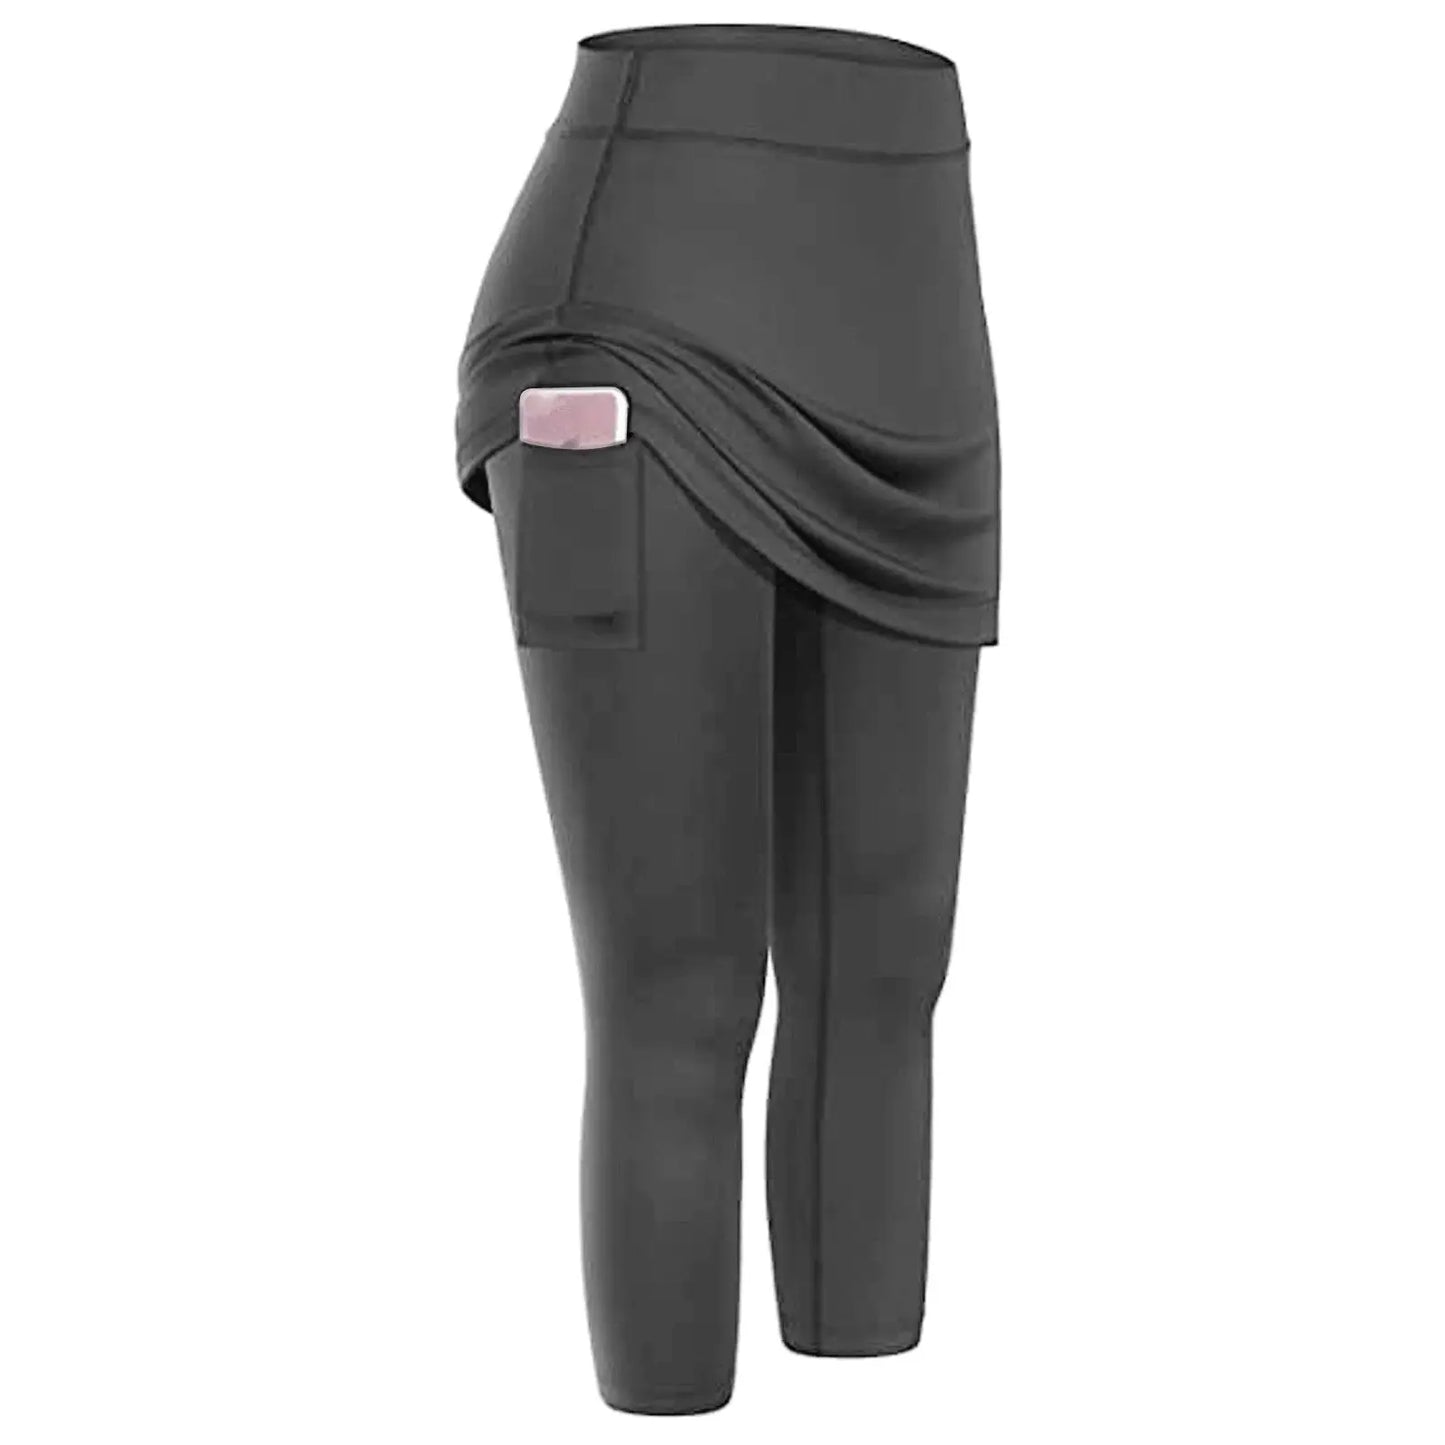 Women Leggings With Pockets Yoga Fitness Pants Sports Clothing M J Fitness